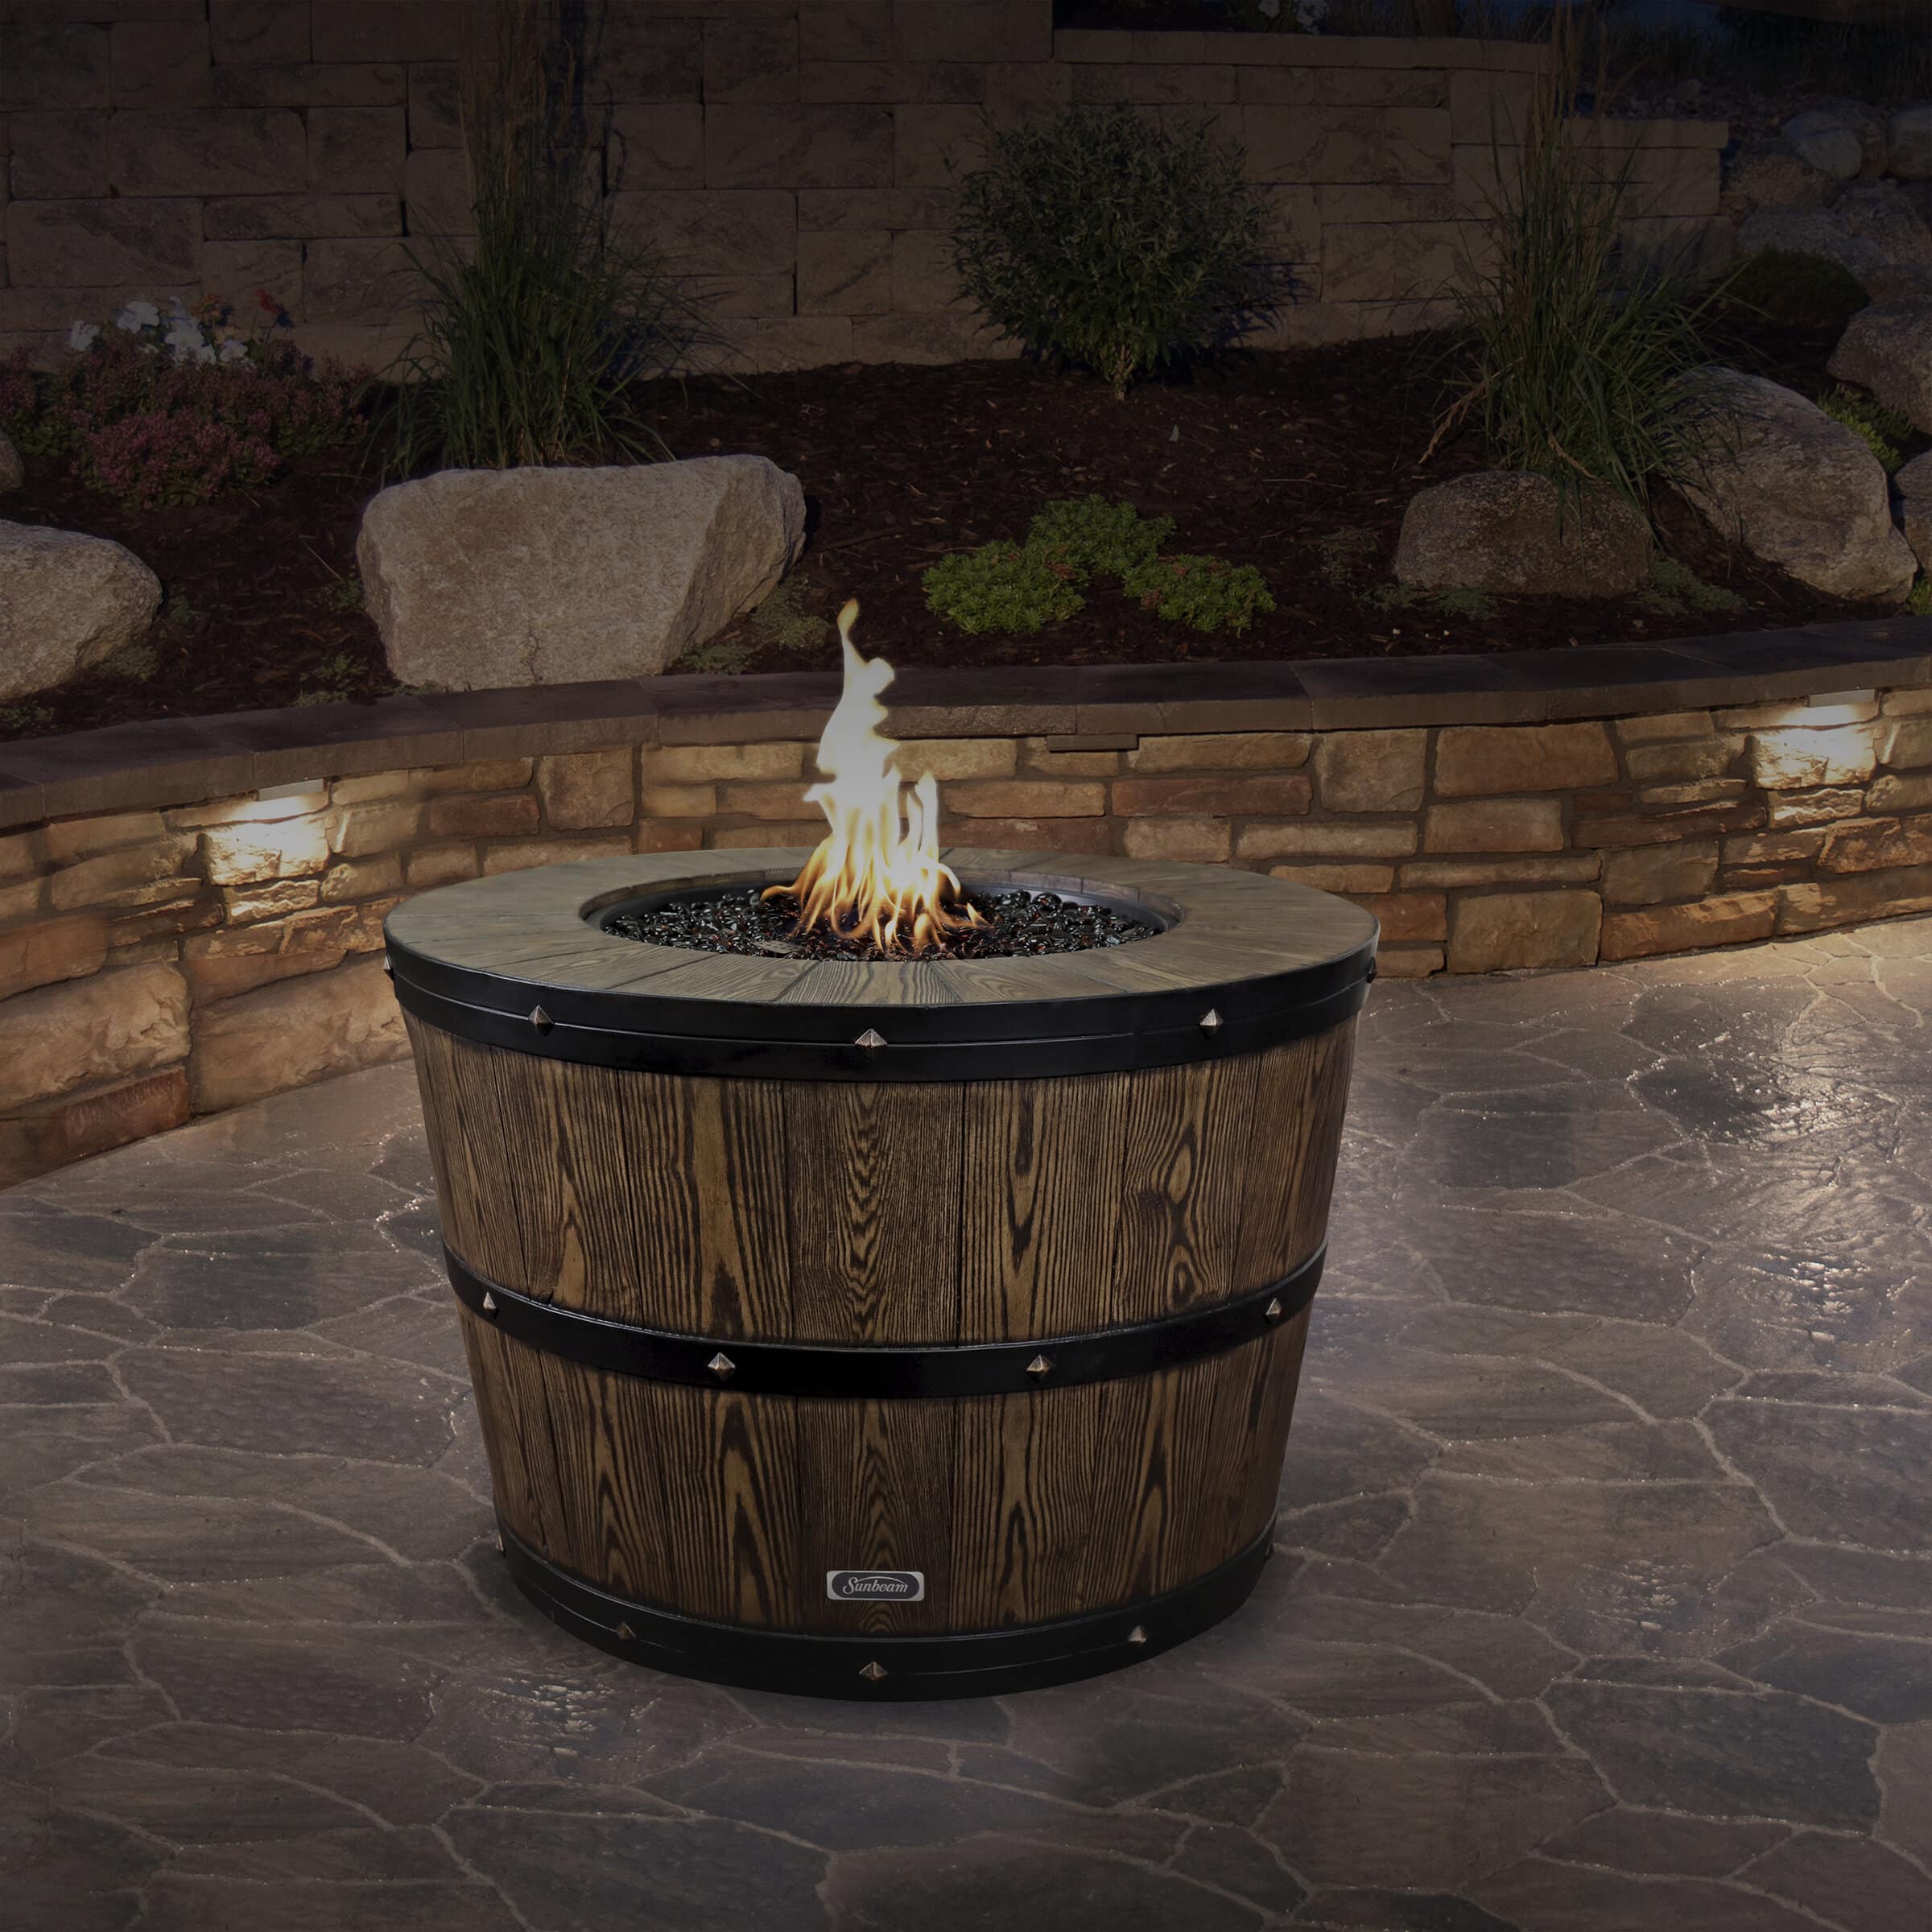 10 Best Outdoor Fire Pit Ideas to DIY or Buy: Backyard Natural Gas Fire Pit